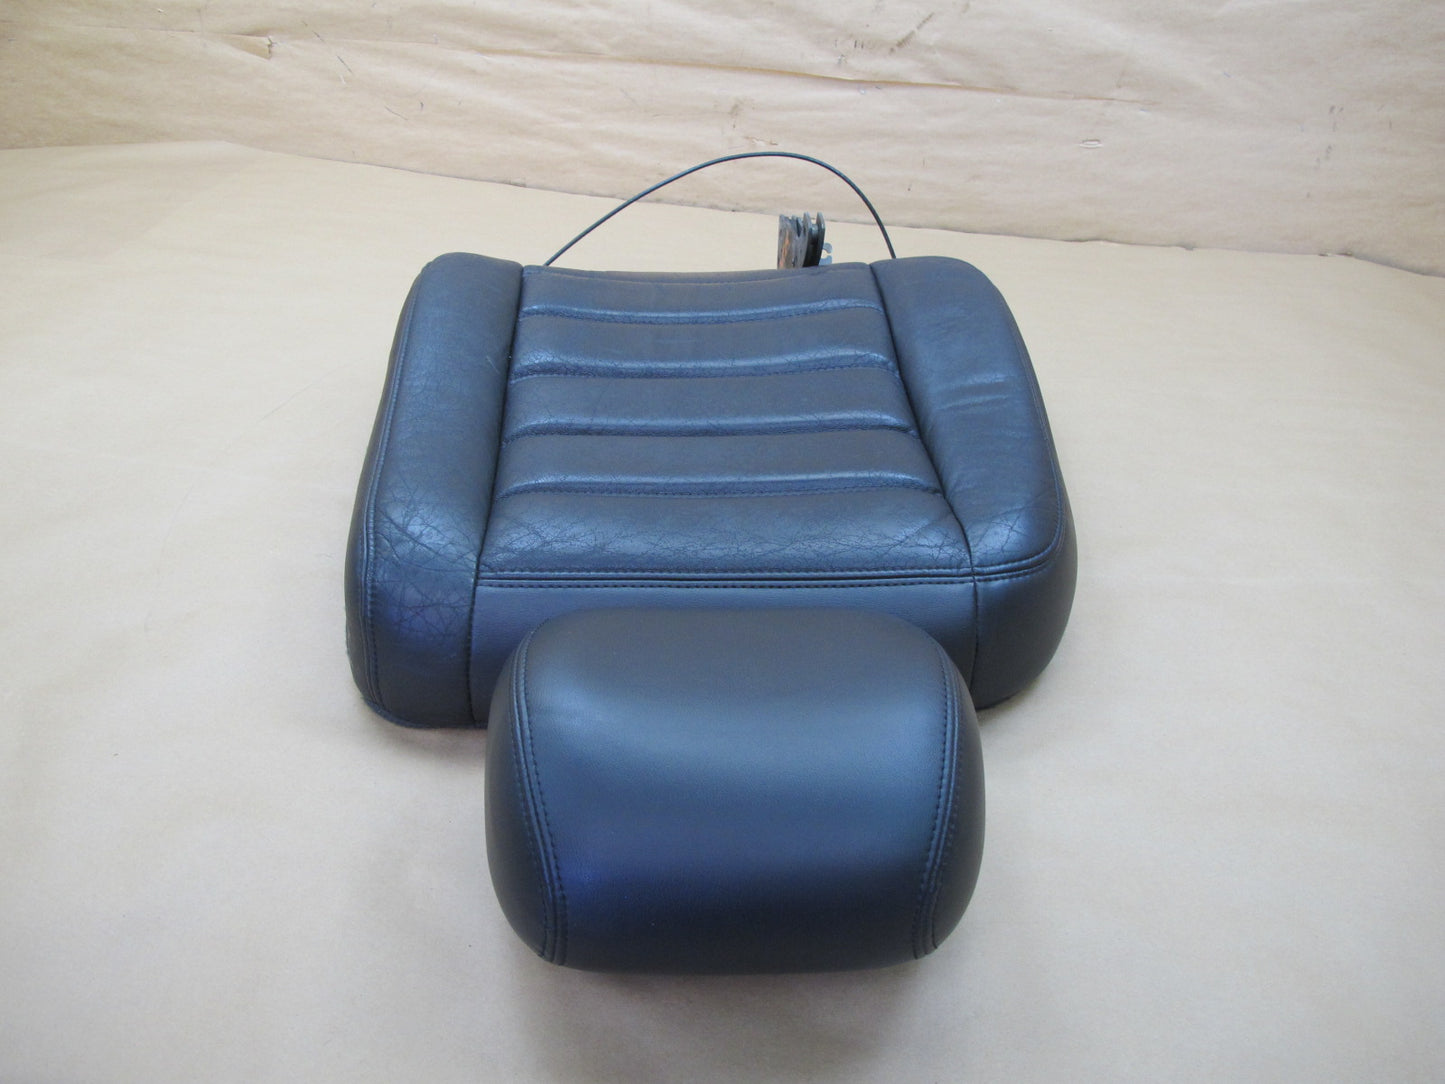 2003-2007 Hummer H2 Rear Right Pass Side Seat Upper Cushion Headrest Leather